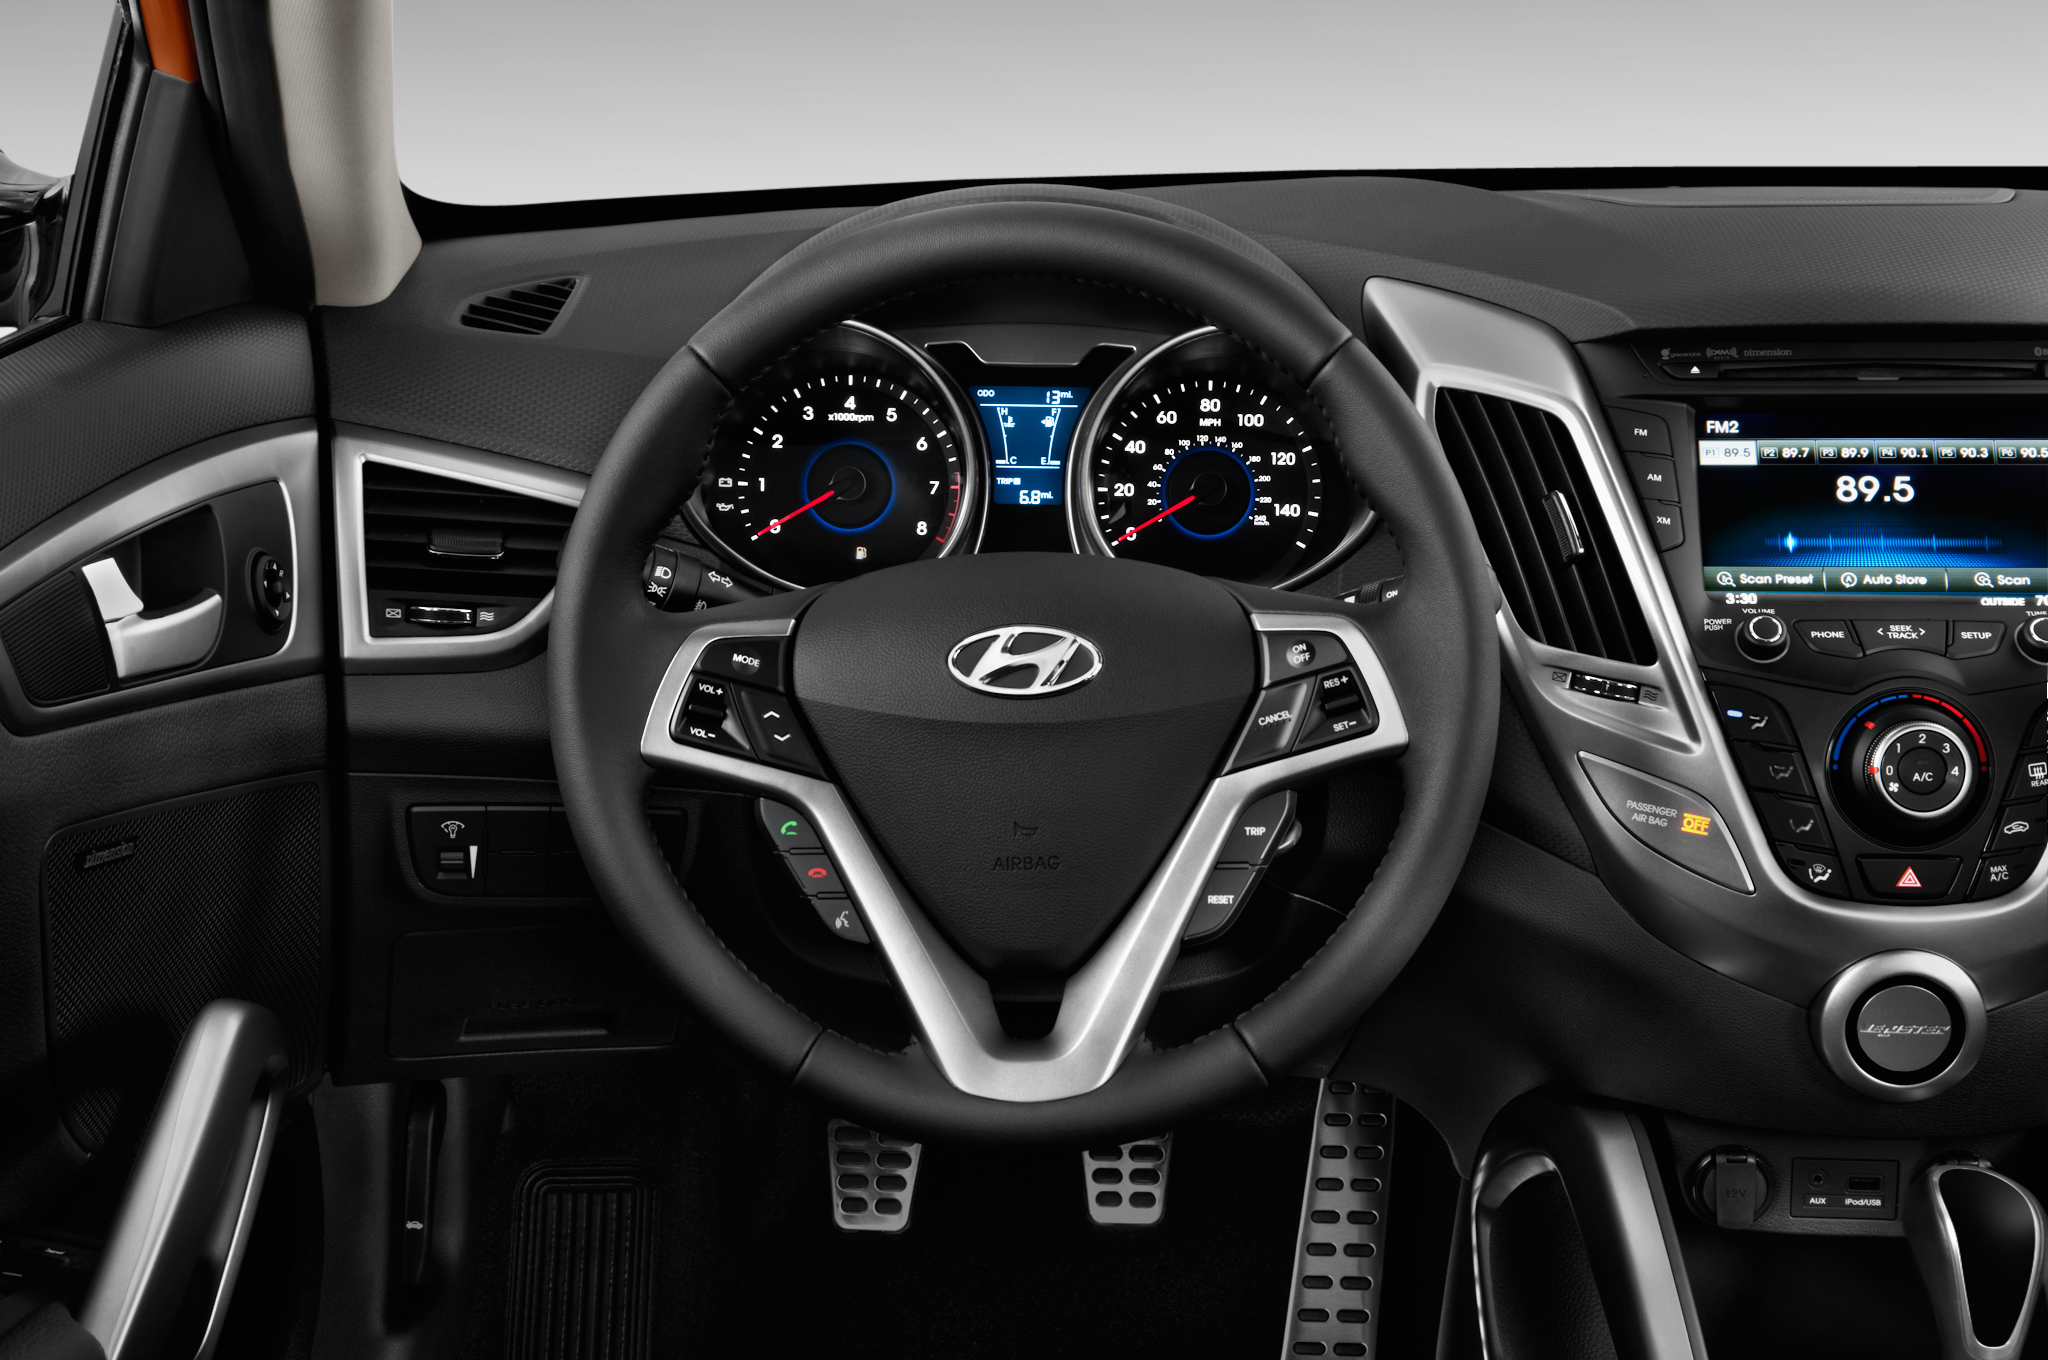 Hyundai Veloster Backgrounds, Compatible - PC, Mobile, Gadgets| 2048x1360 px